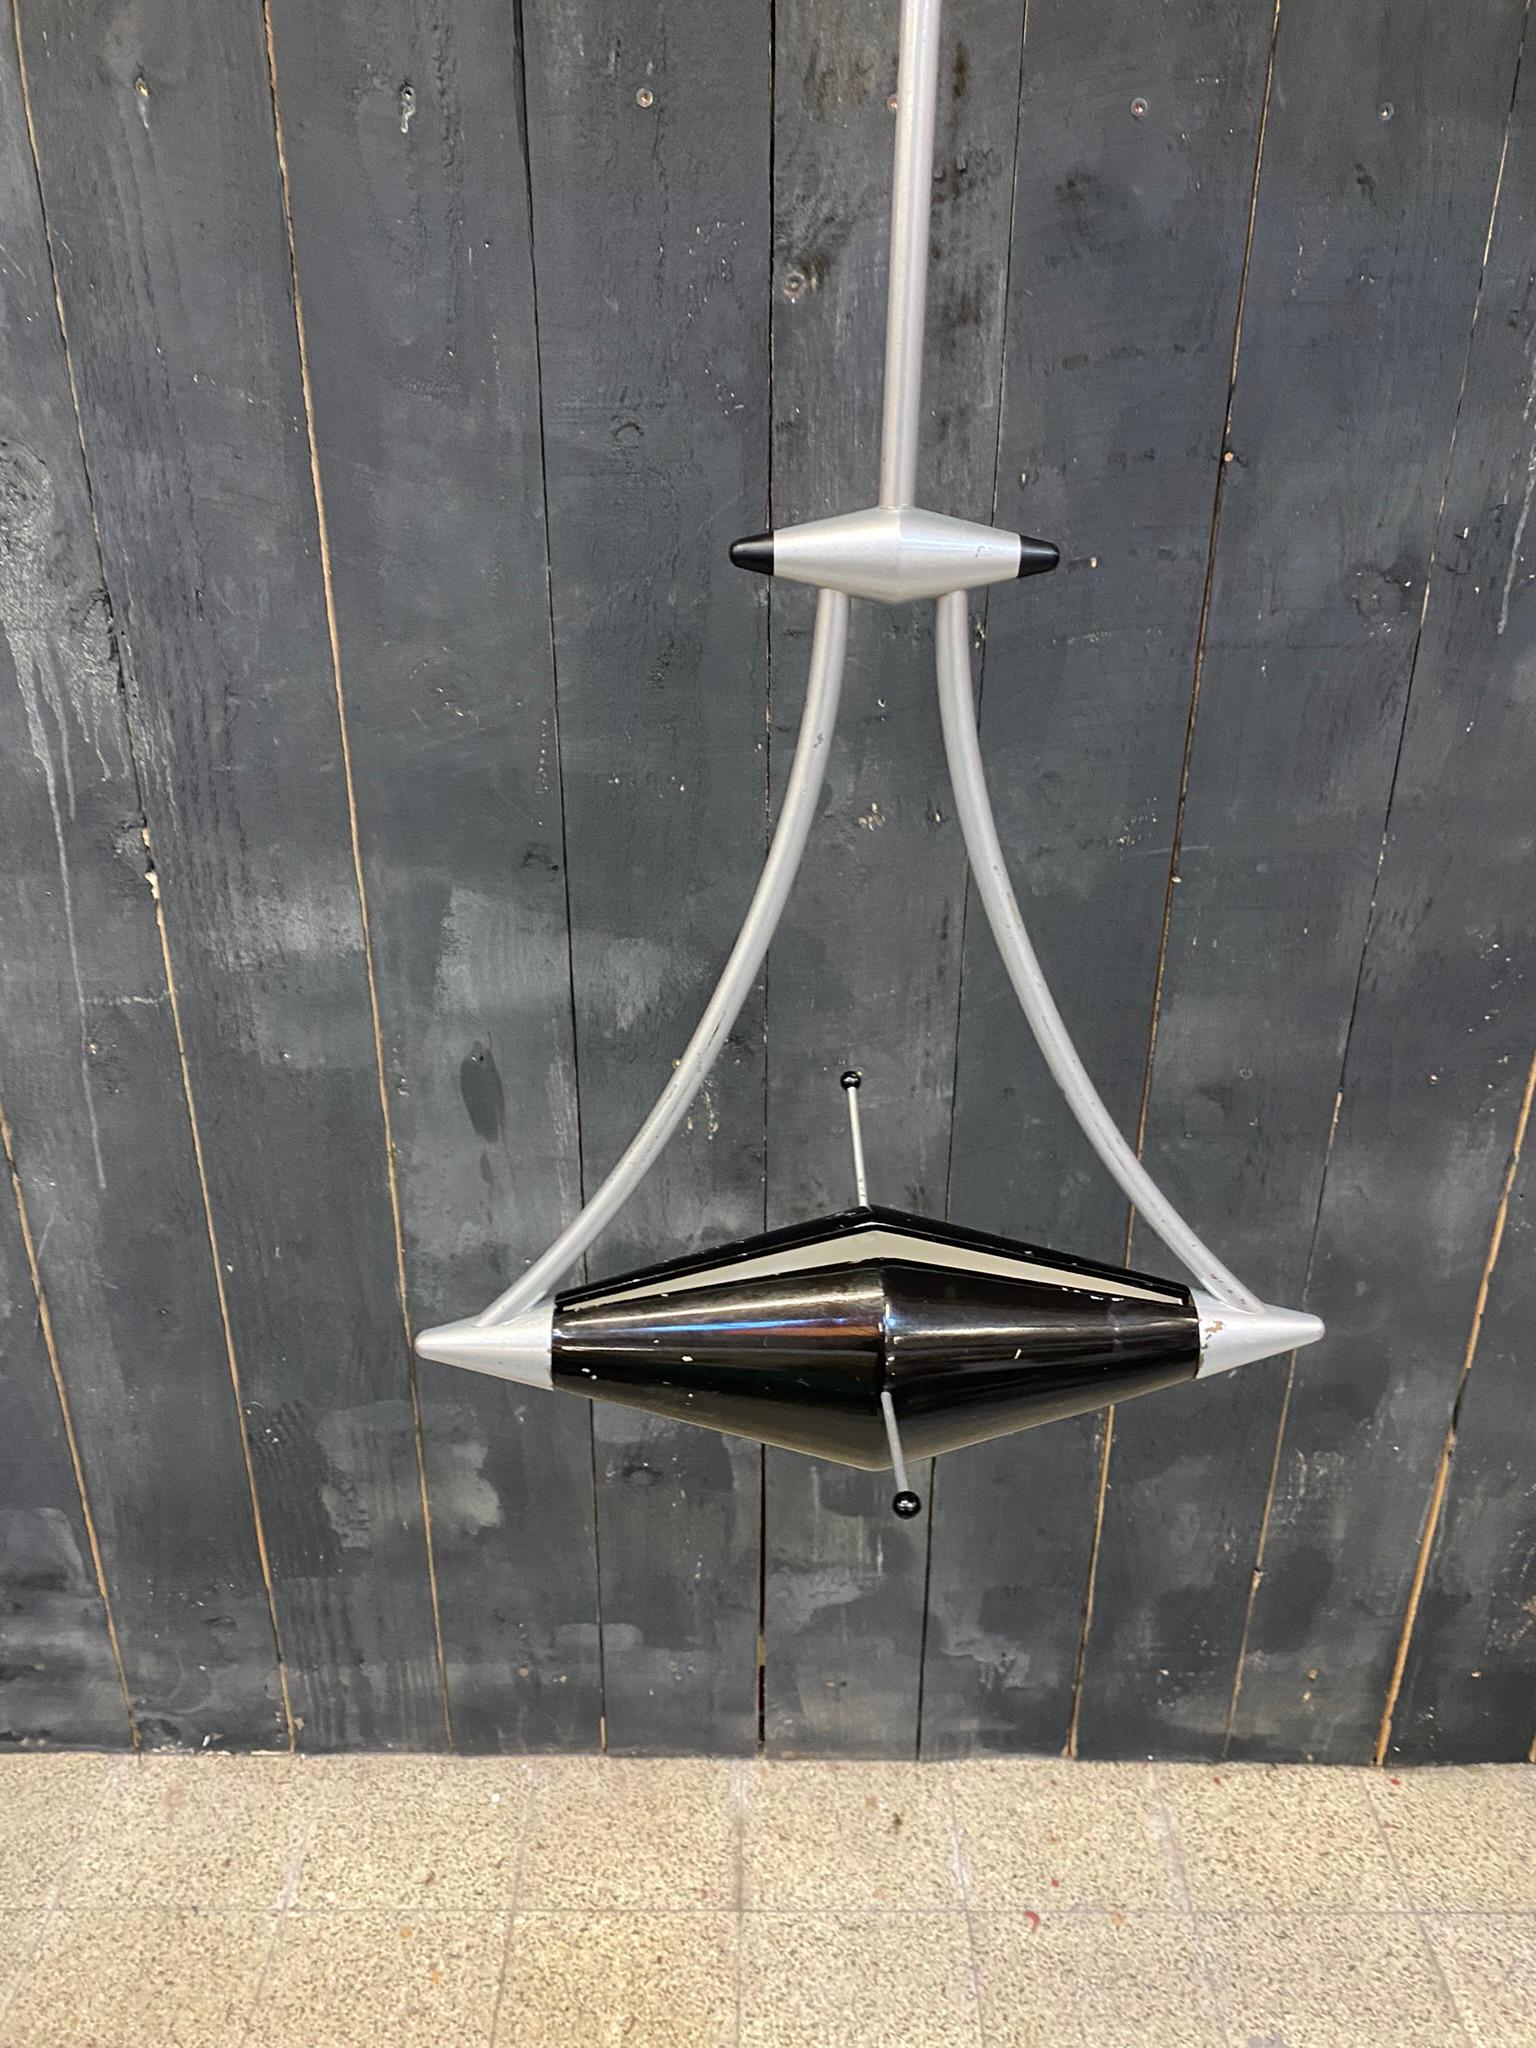 Dutch Frans Schrofer, Very Large Suspension Adjustable in Height, circa 1980 For Sale